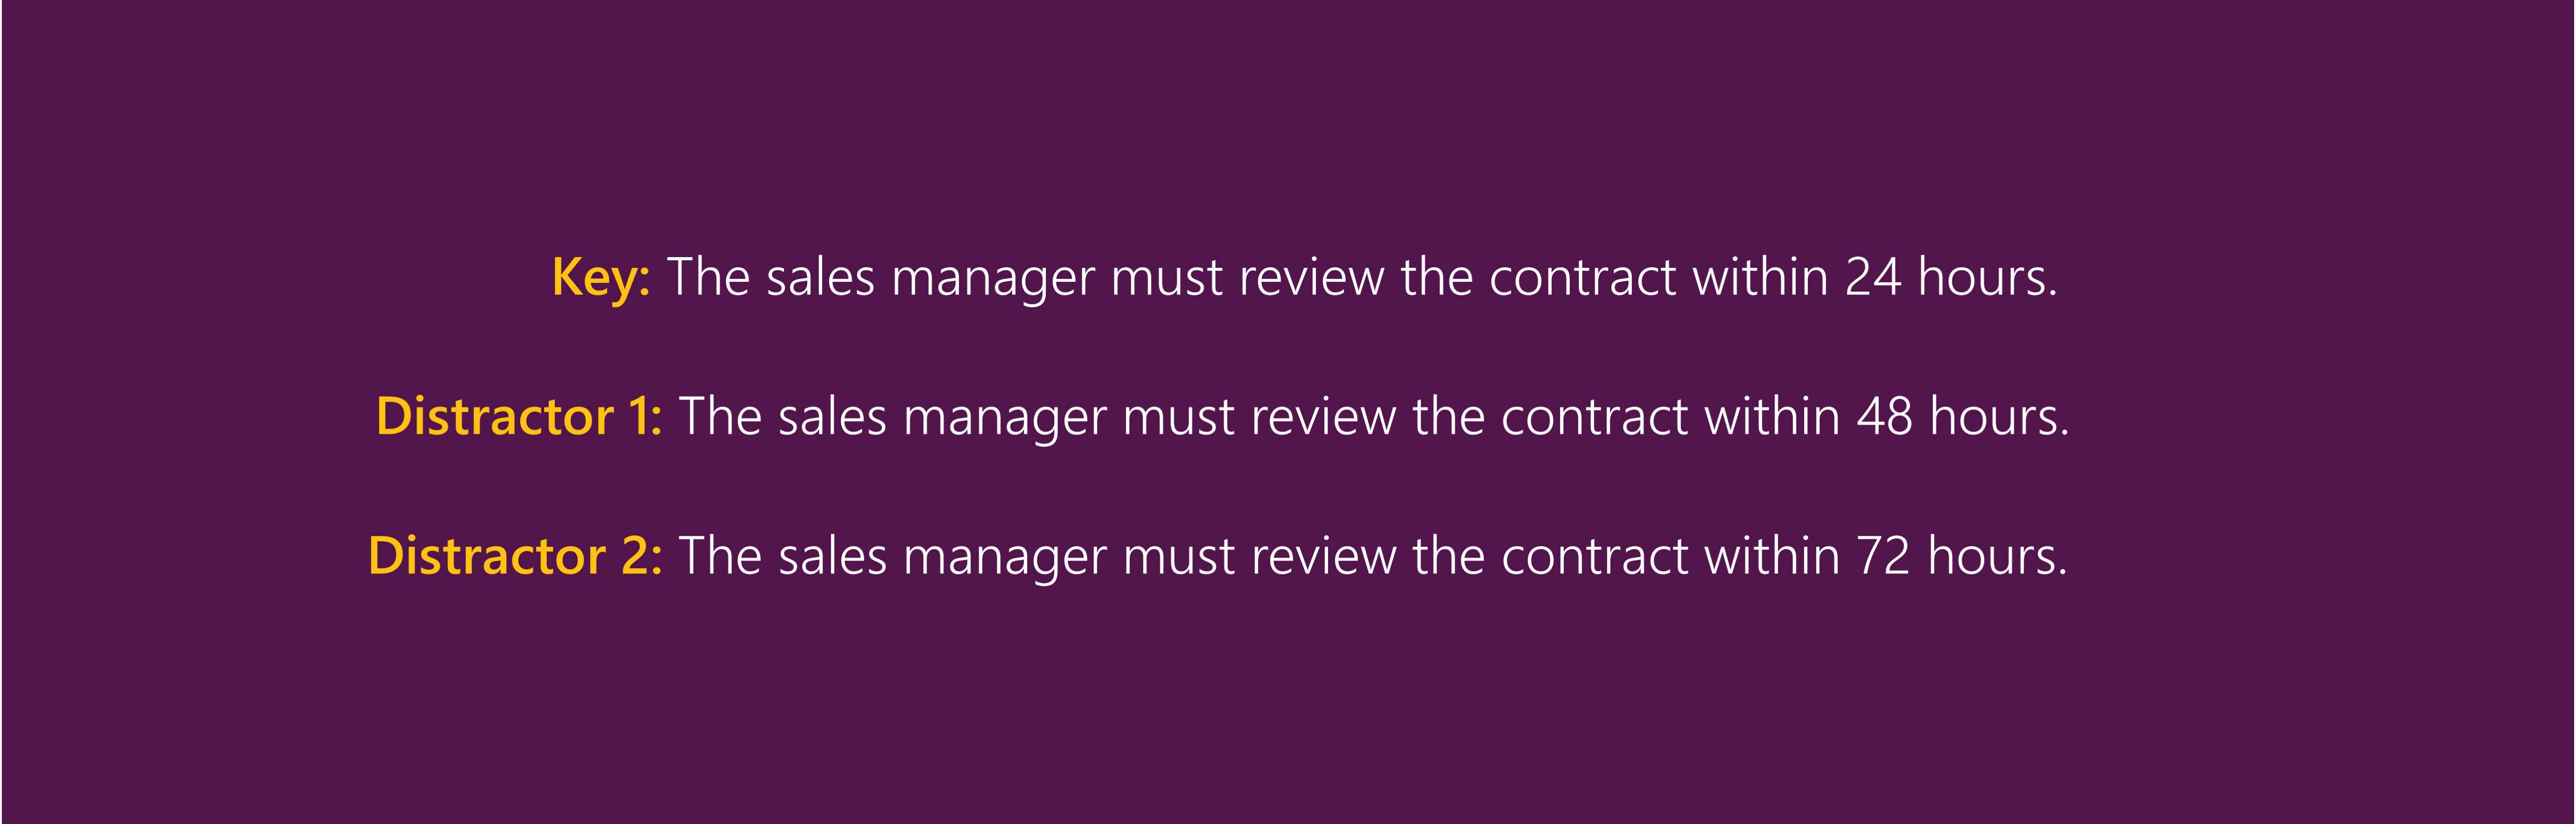 Key: The sales manager must review the contract within 24 hours. Distractor 1: The sales manager must review the contract within 48 hours. Distractor 2: The sales manager must review the contract within 72 hours.